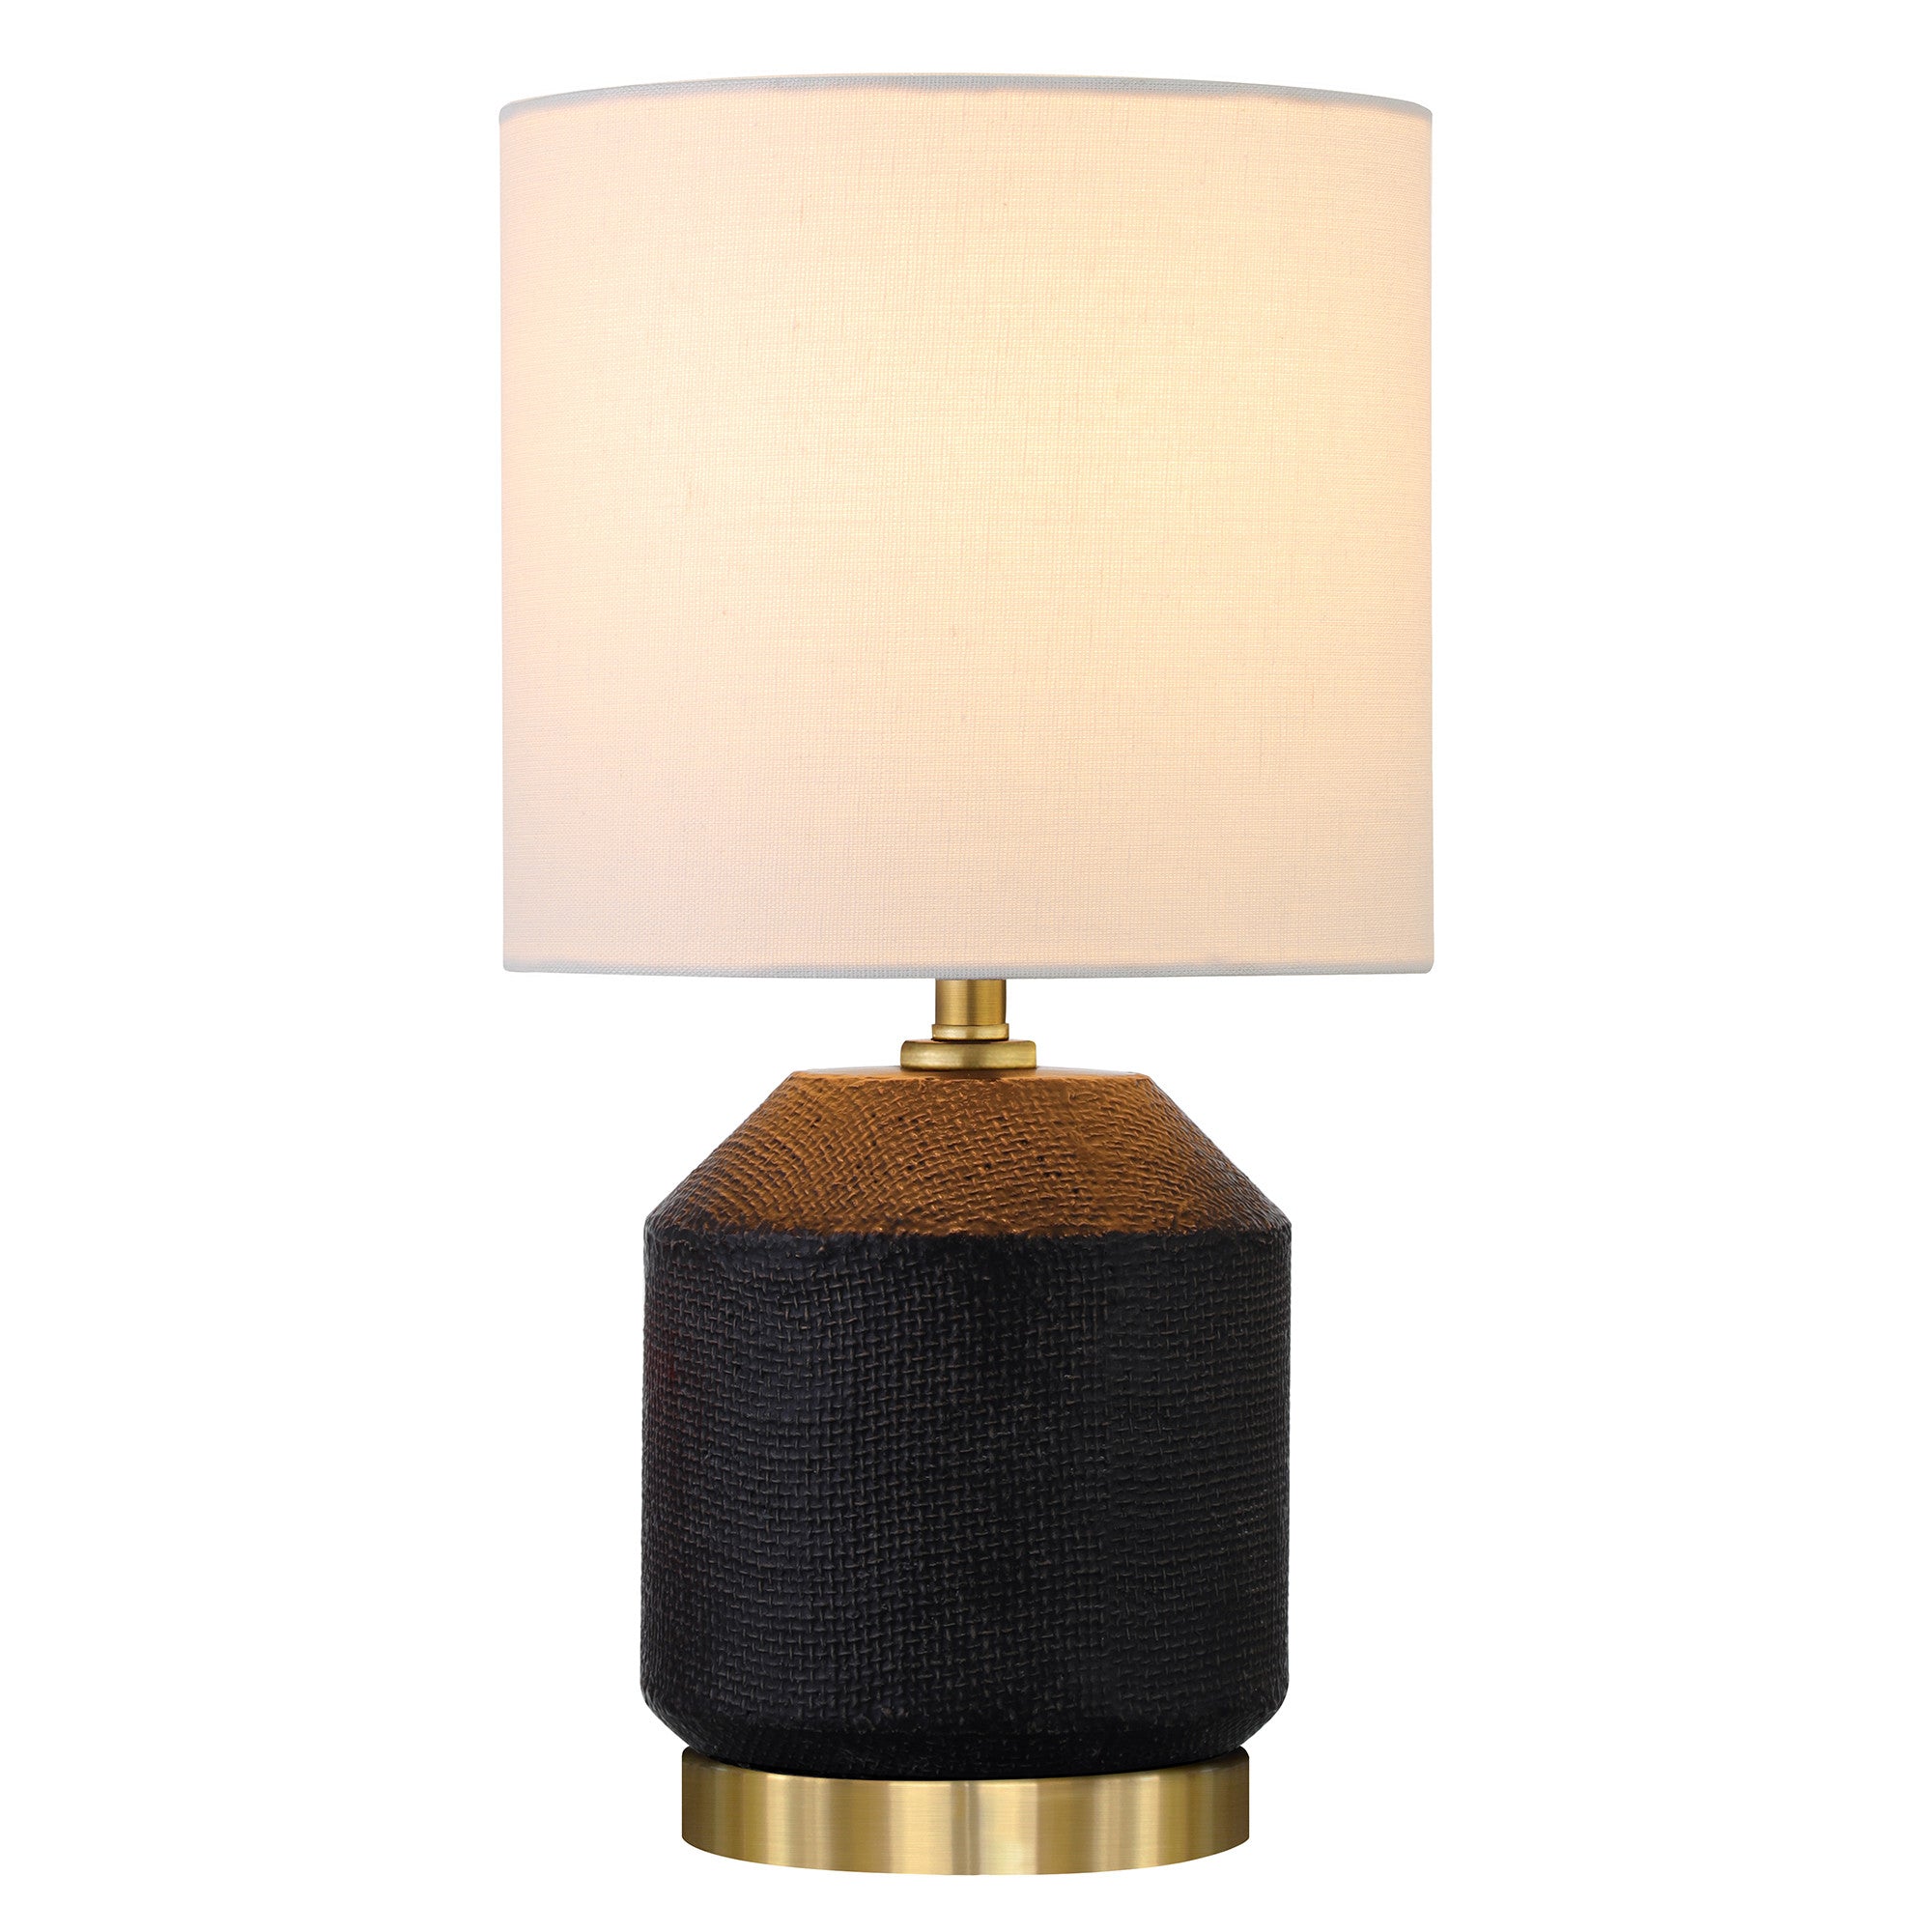 15" Black and Gold Ceramic Cylinder Table Lamp With White Drum Shade